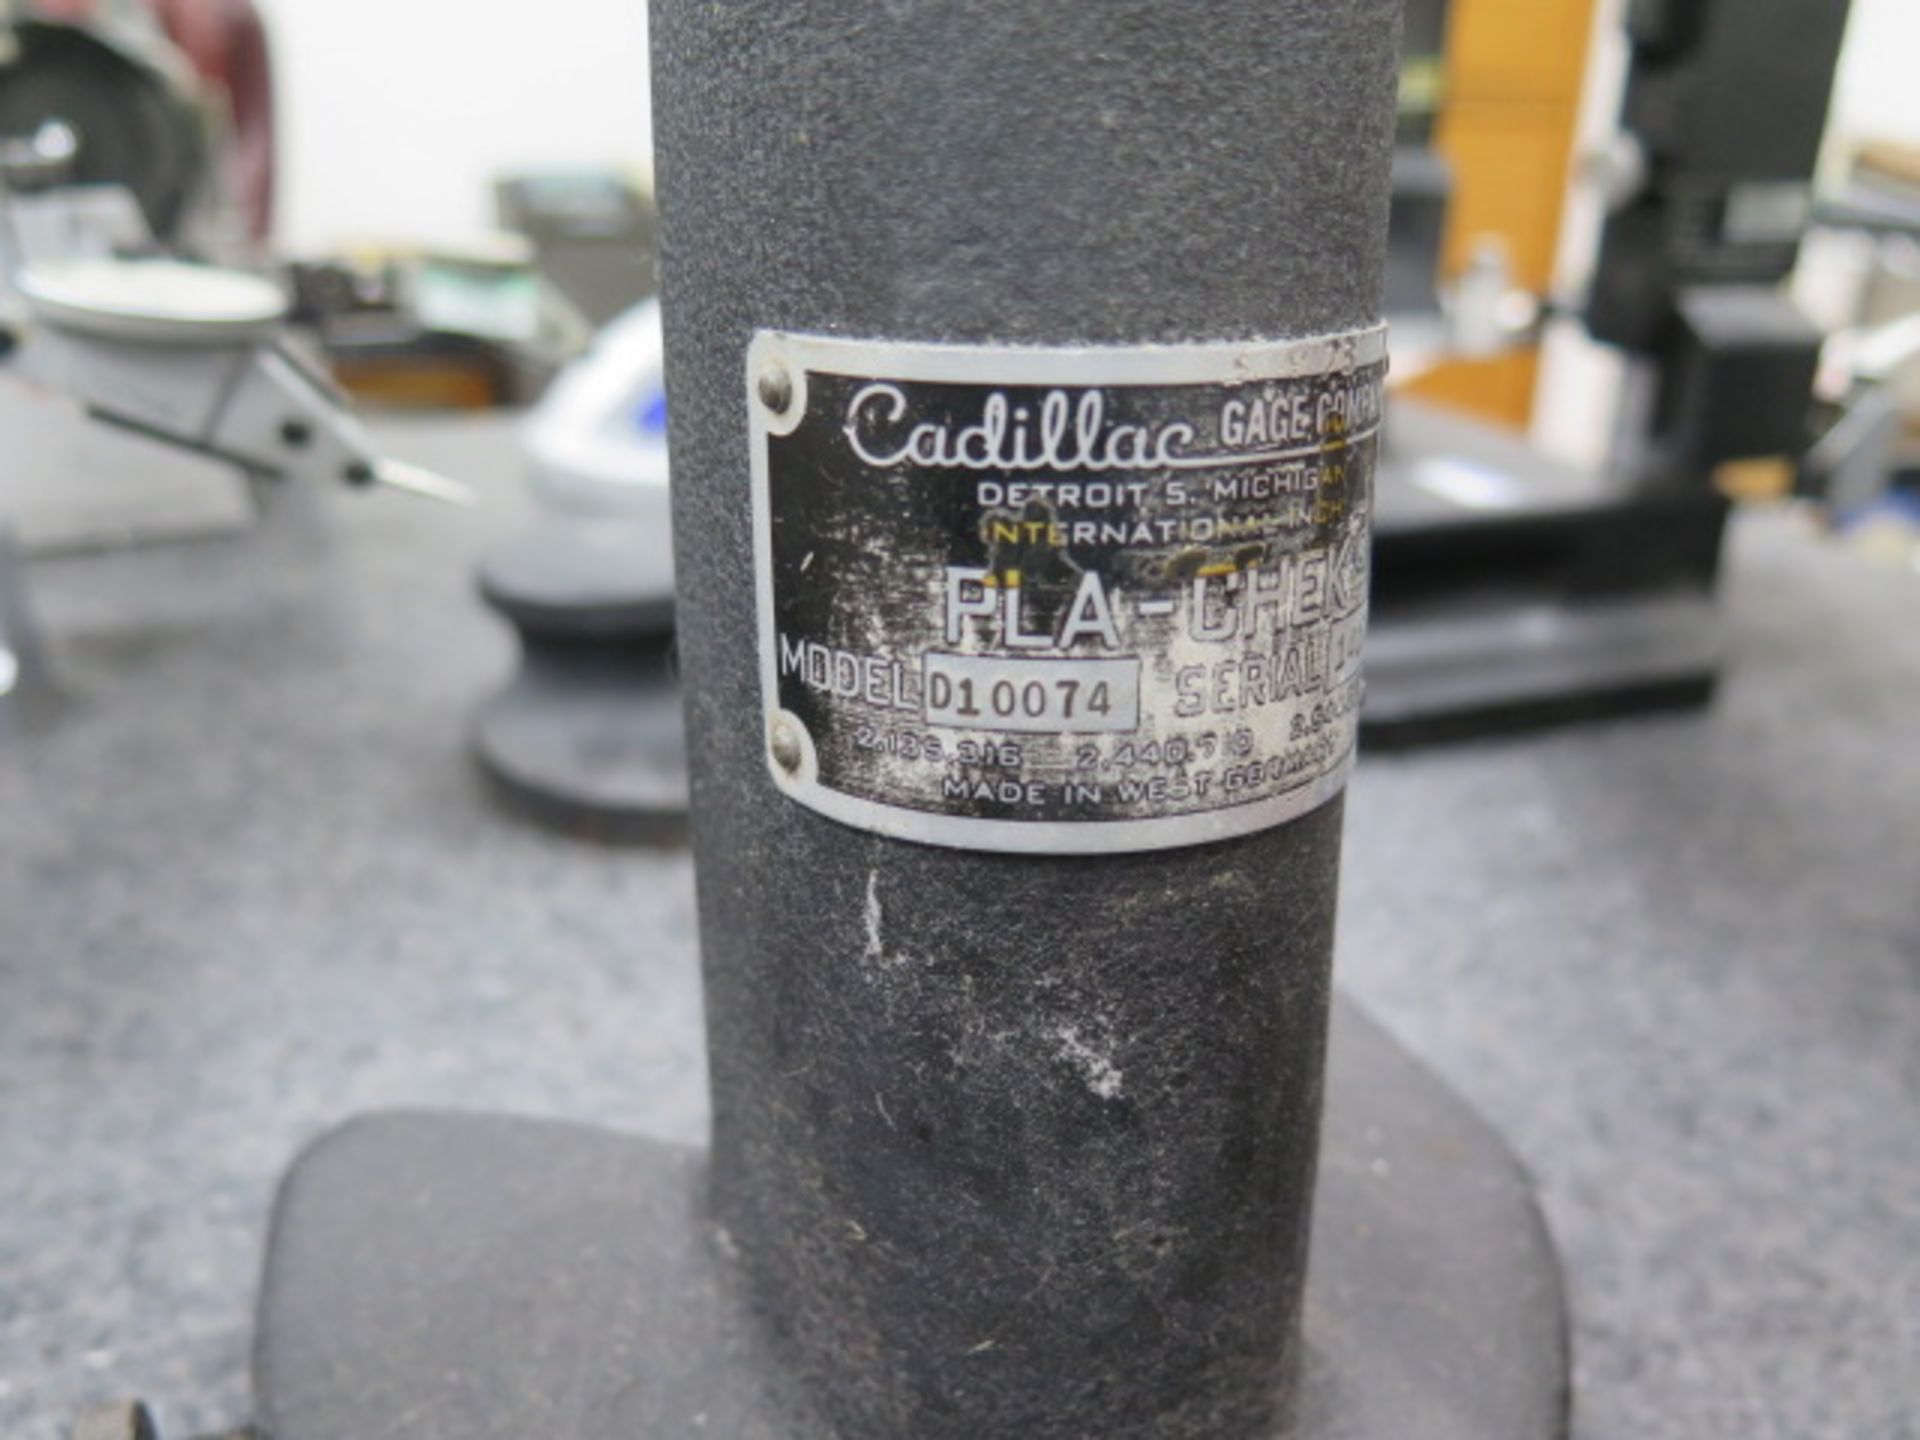 Cadillac 12" "Pla-Chek" Height Master (SOLD AS-IS - NO WARRANTY) - Image 5 of 5